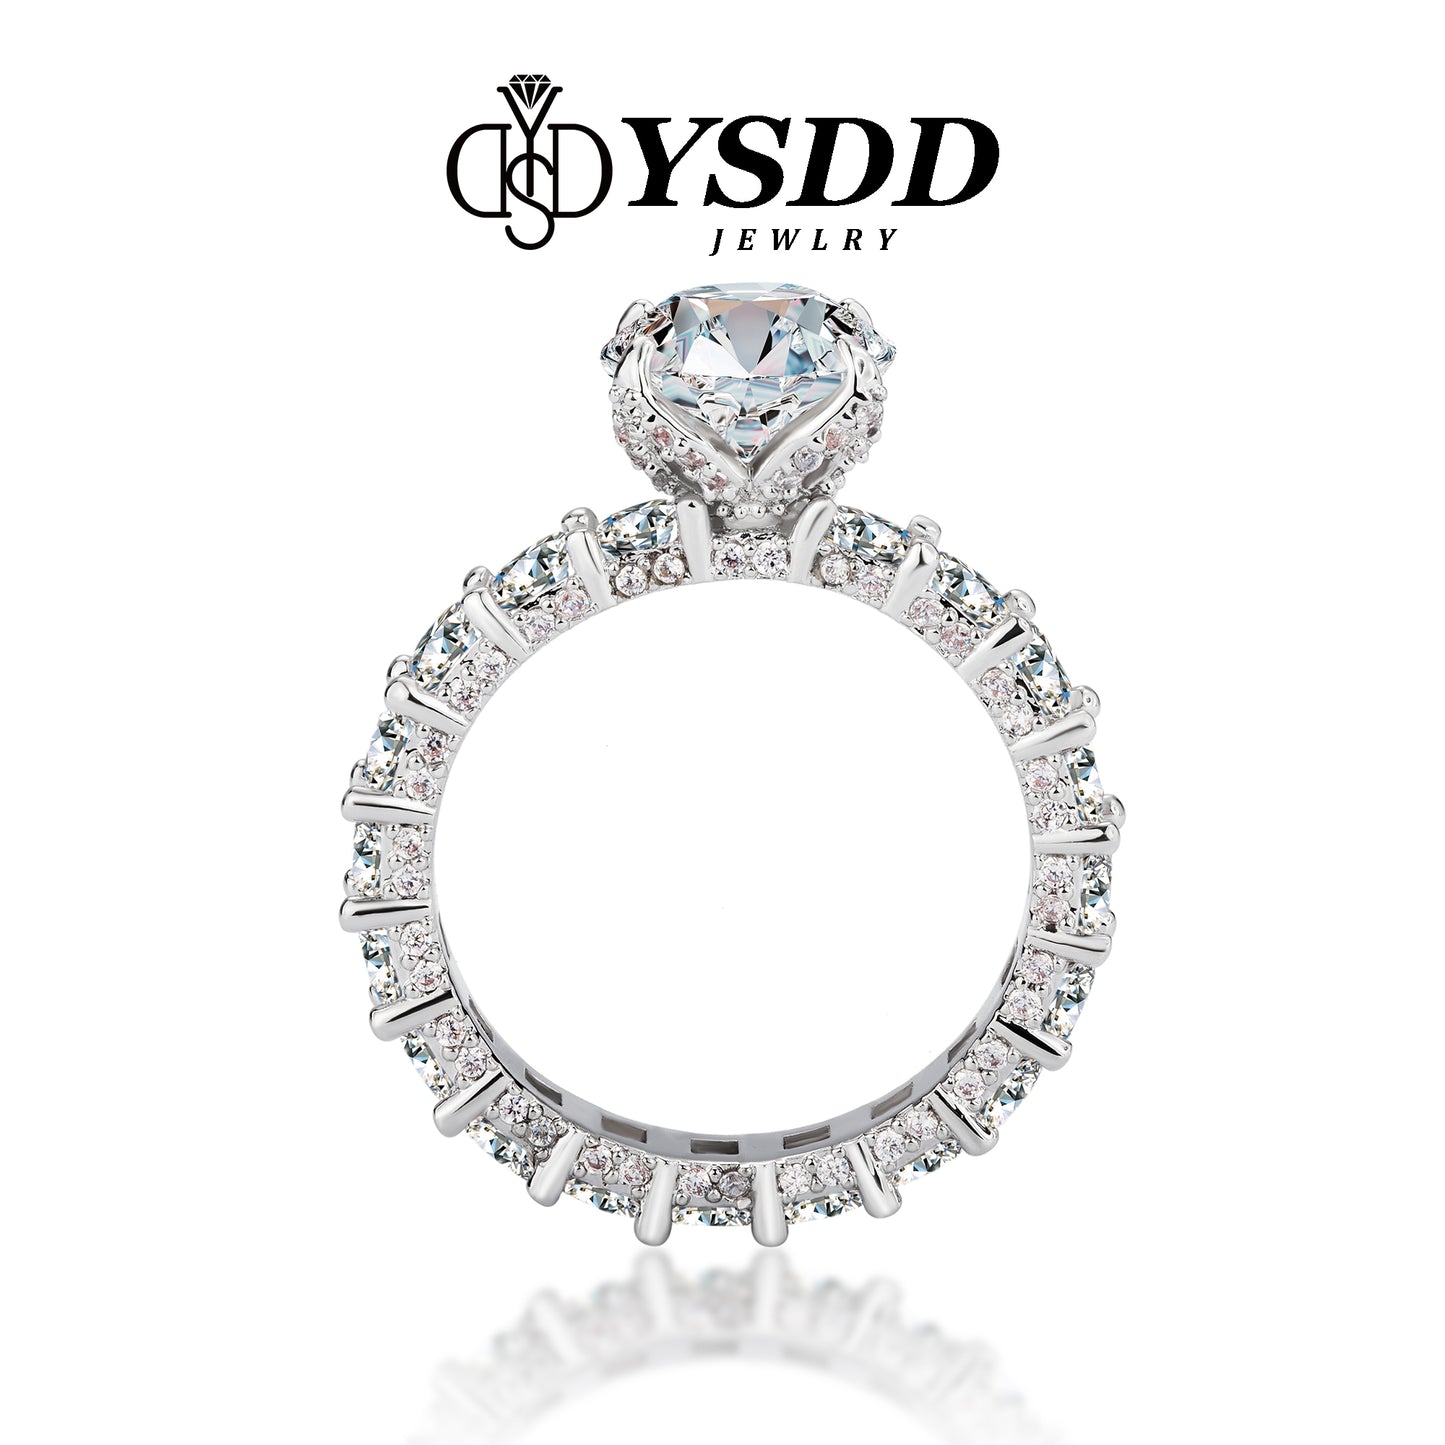 【#125 Time-limited Sale】Luxury 3CT Moissanite Engagement Ring in s925